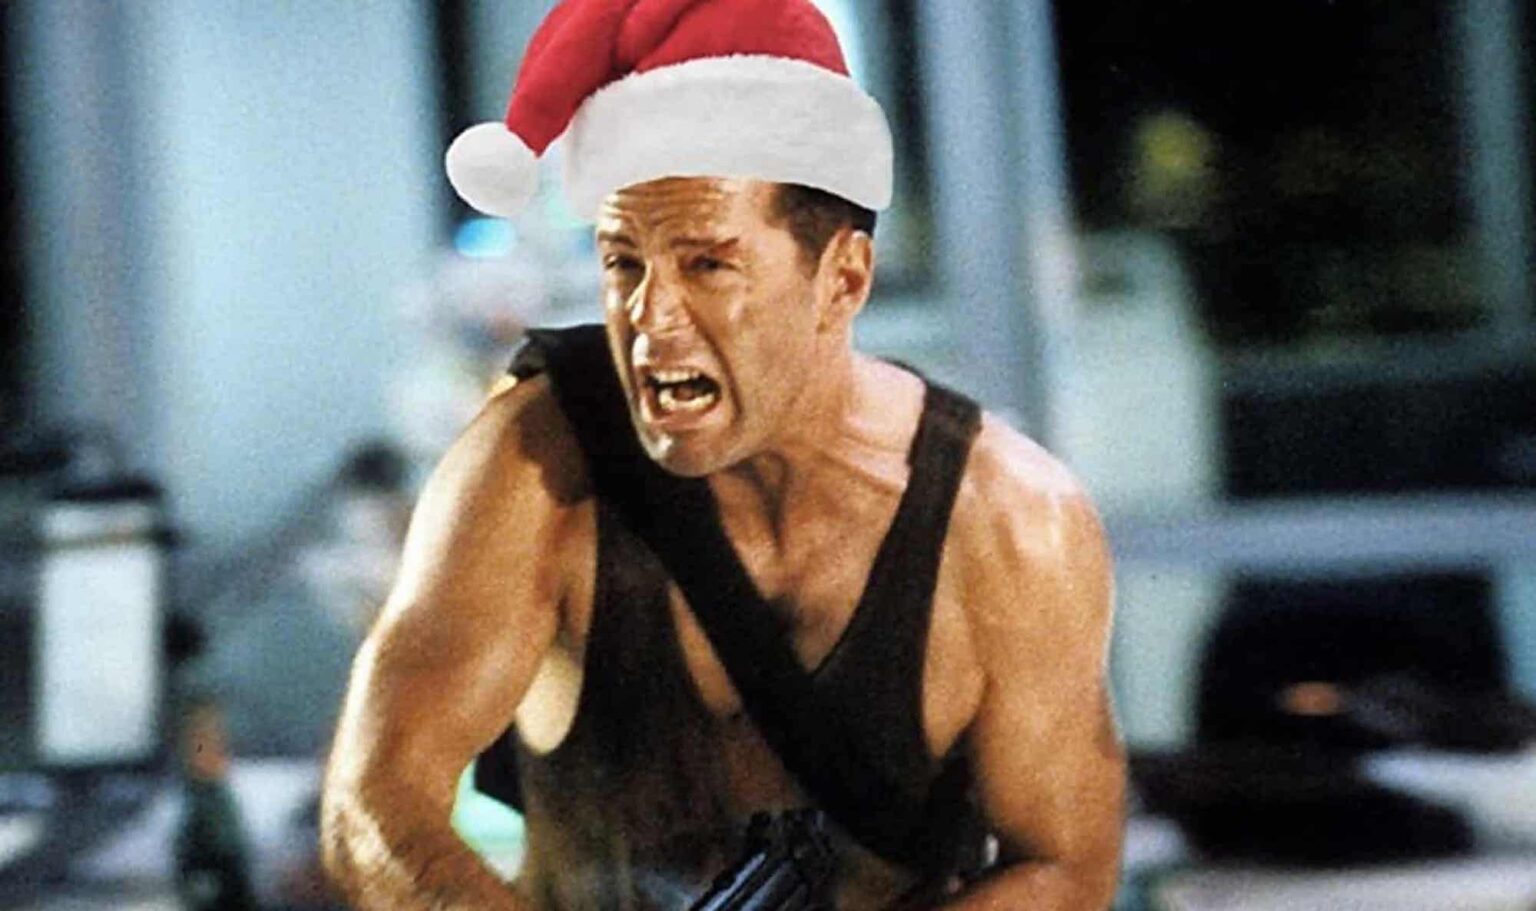 'Die Hard' is a classic action movie. Find out whether its a Christmas classic with these holiday memes.